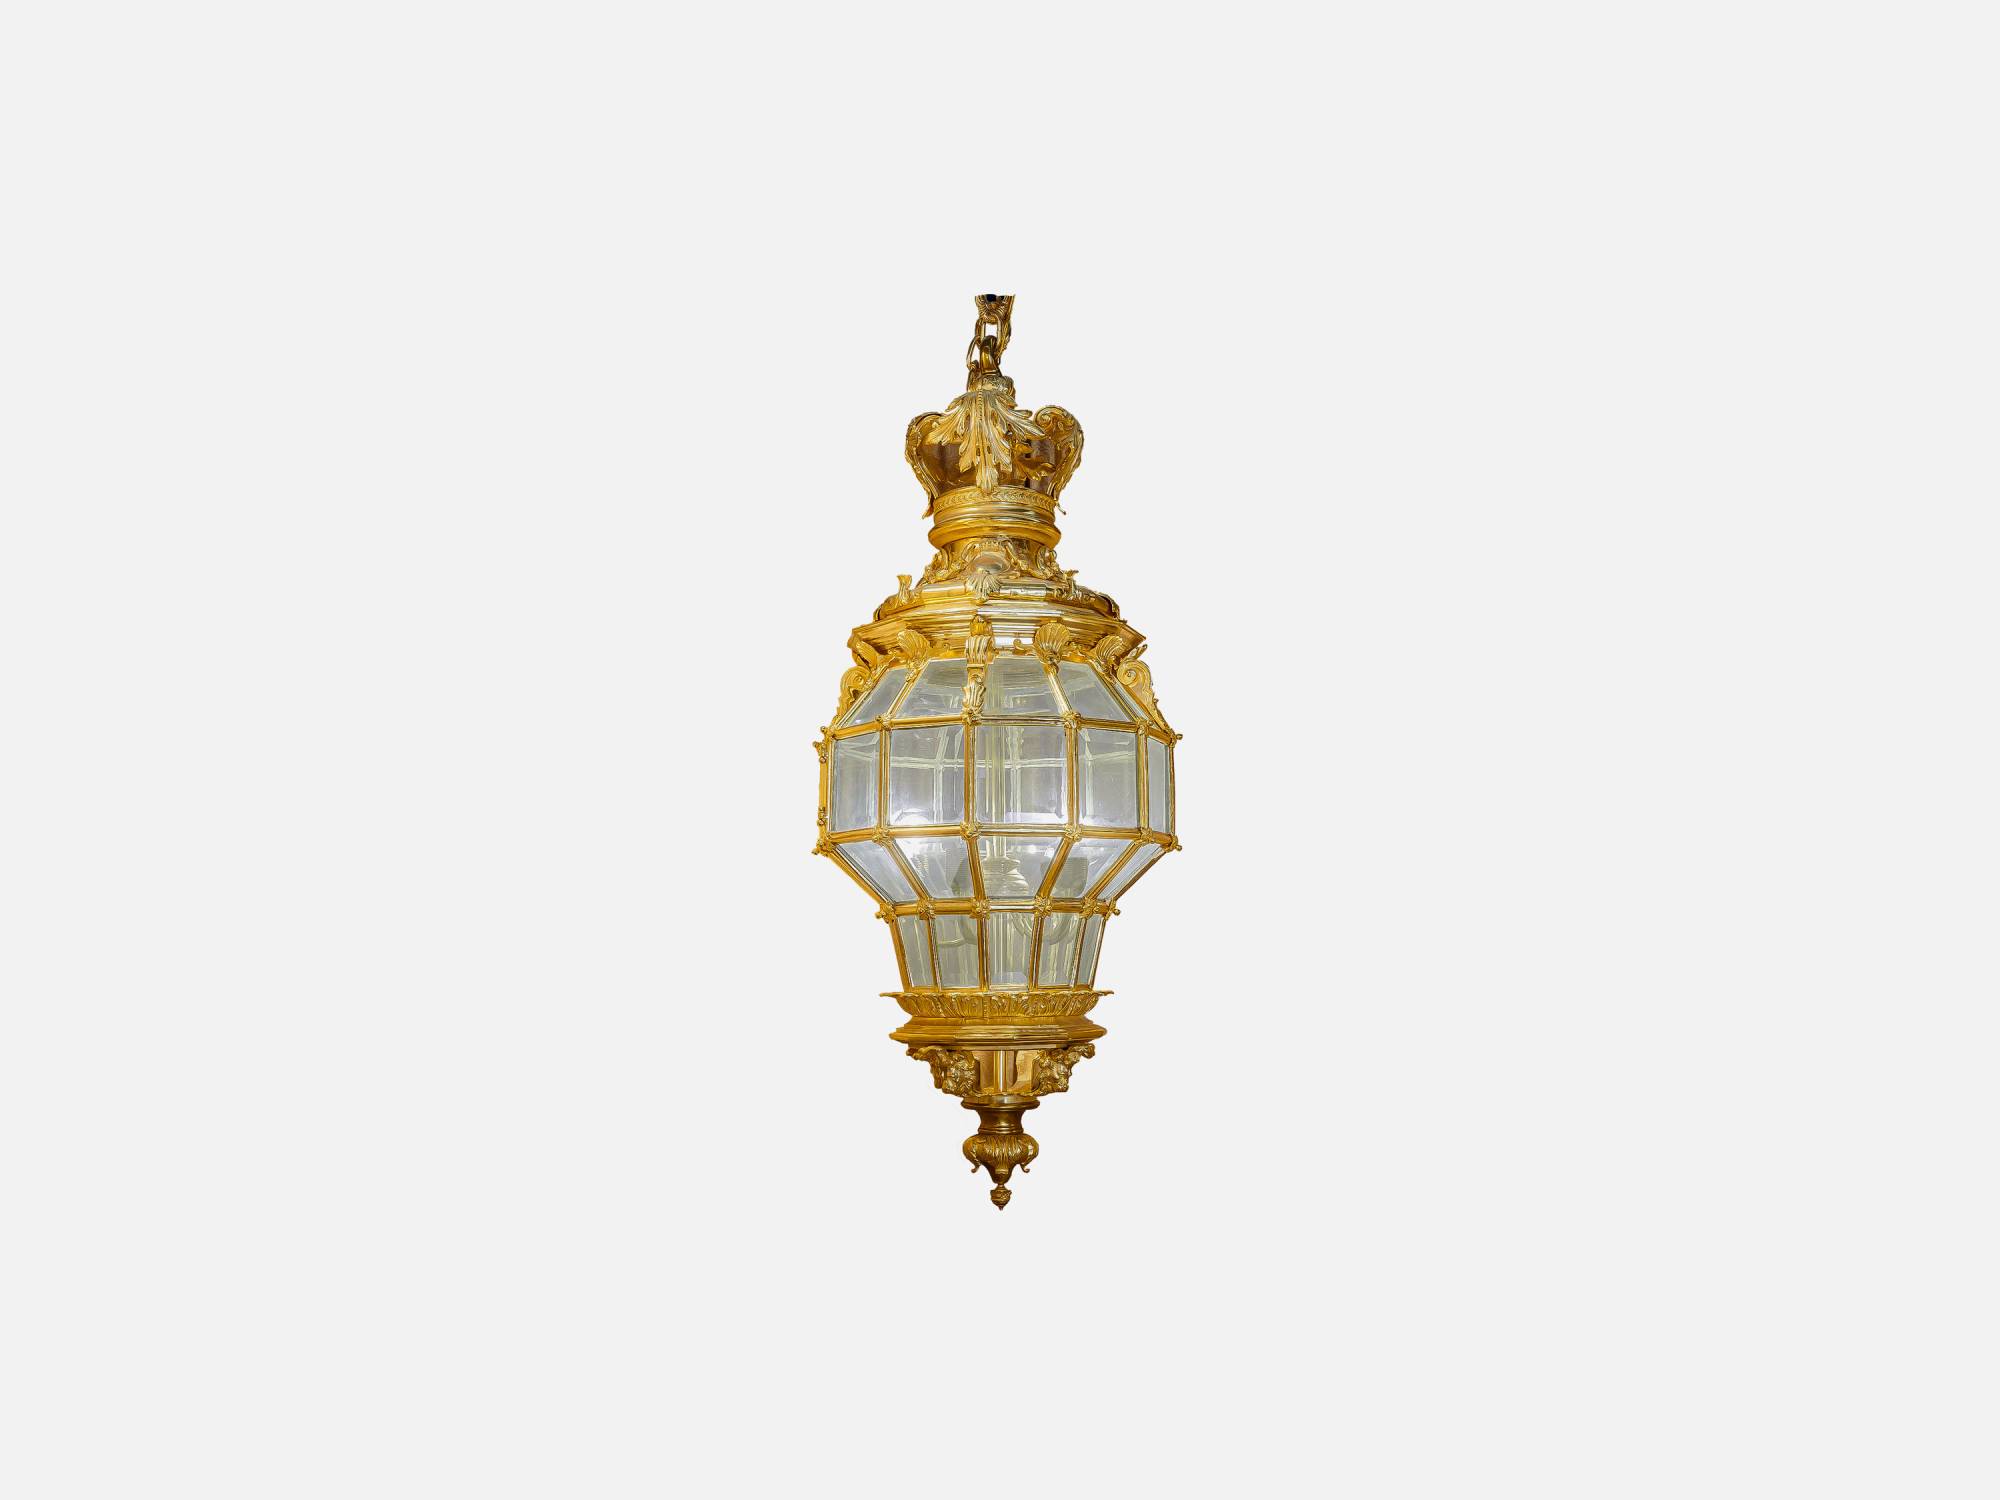 ART. 823 – The elegance of luxury classic Lighting made in Italy by C.G. Capelletti.